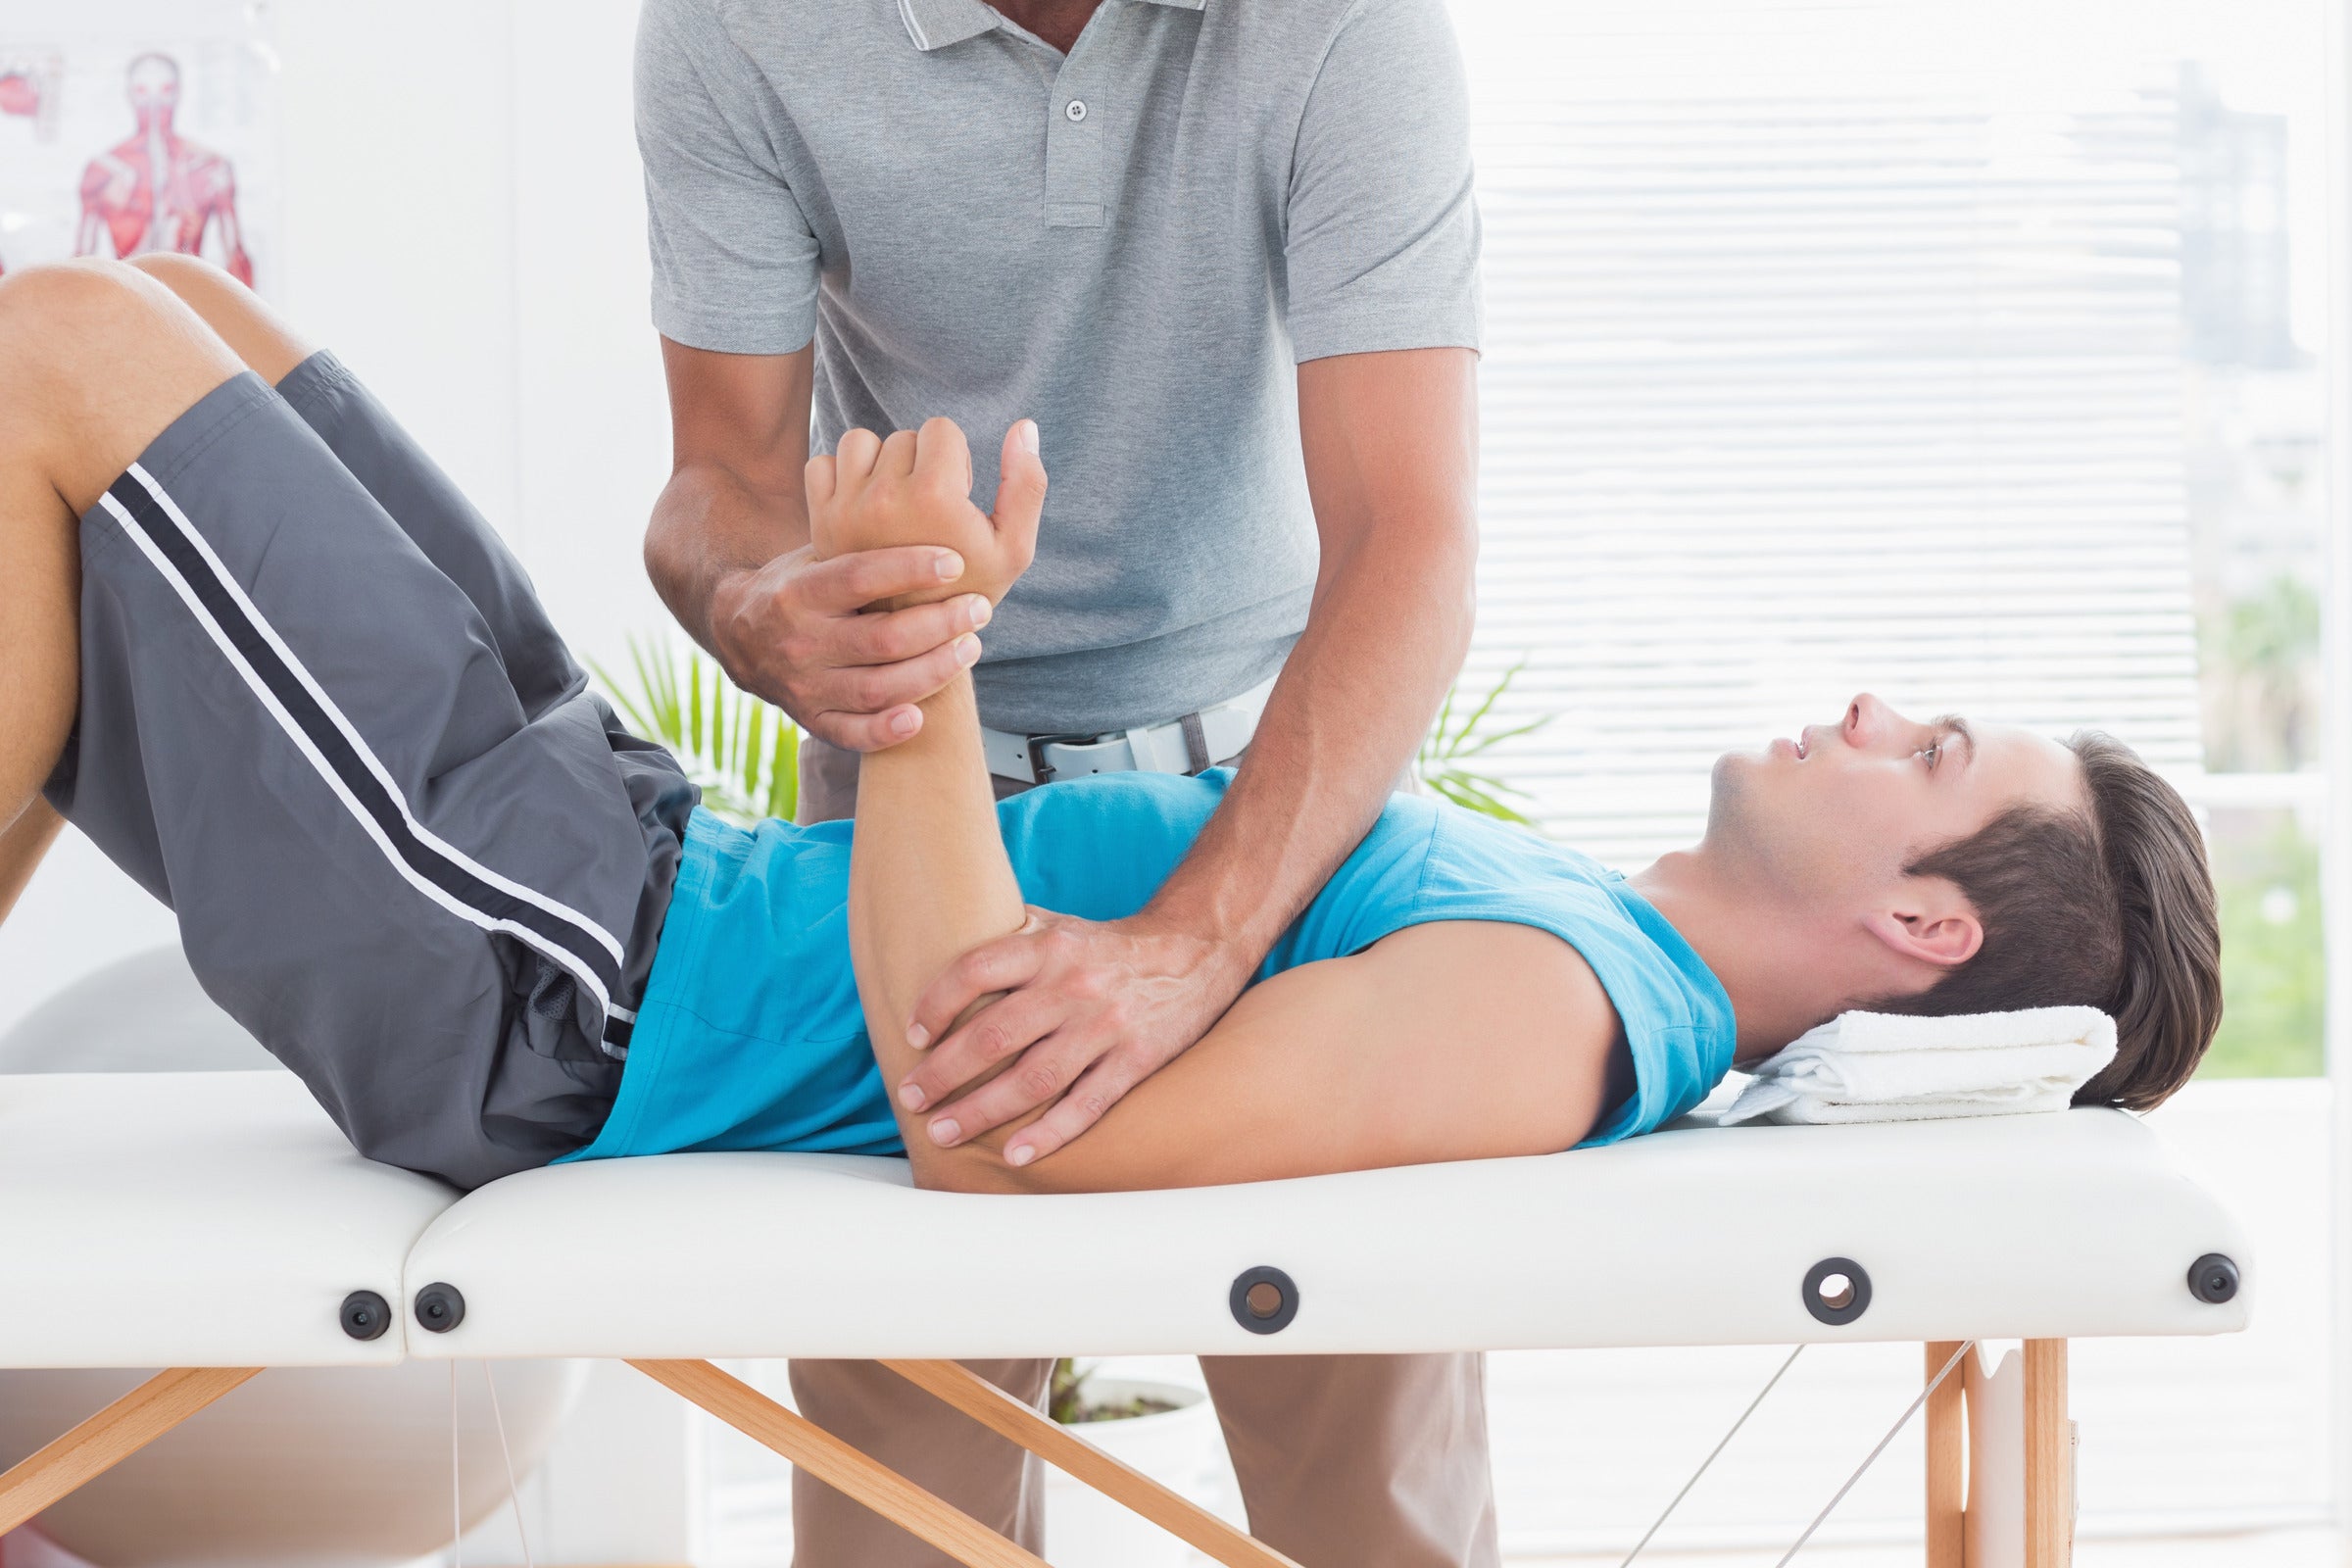 Massage Therapy: One Of The Best Treatments For Soft Tissue Injuries